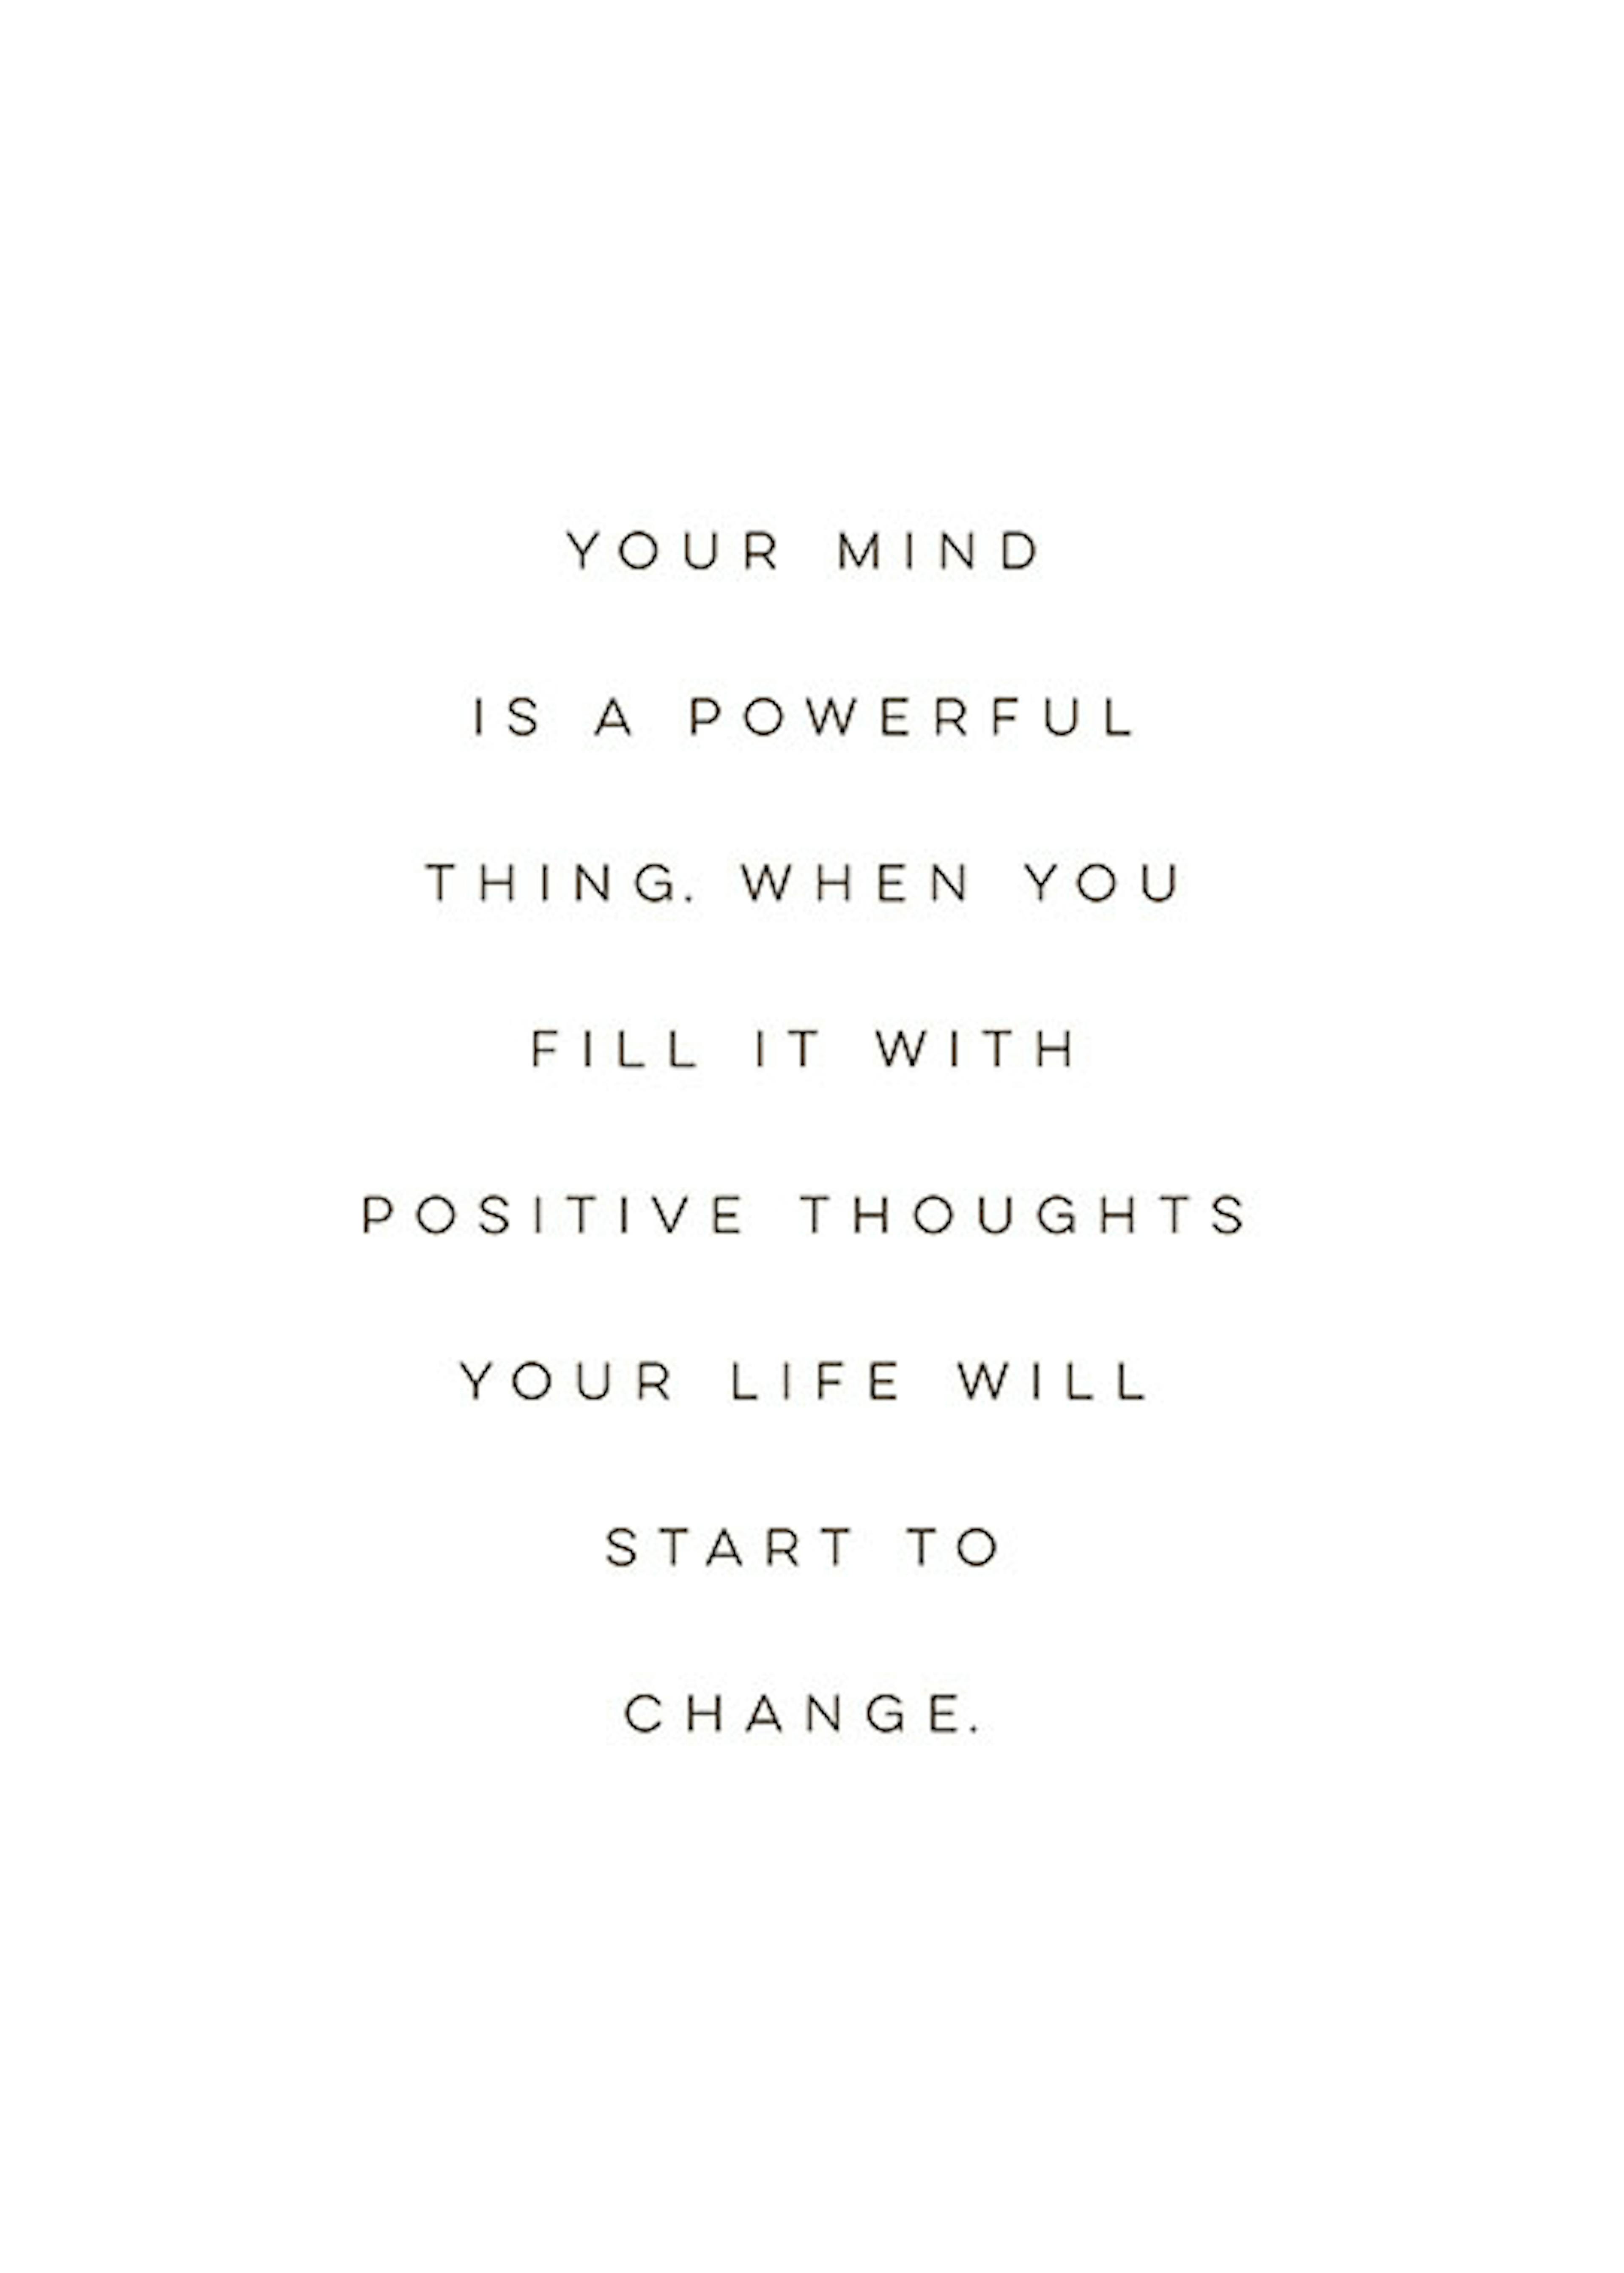 Póster 'Your mind is a powerful thing'